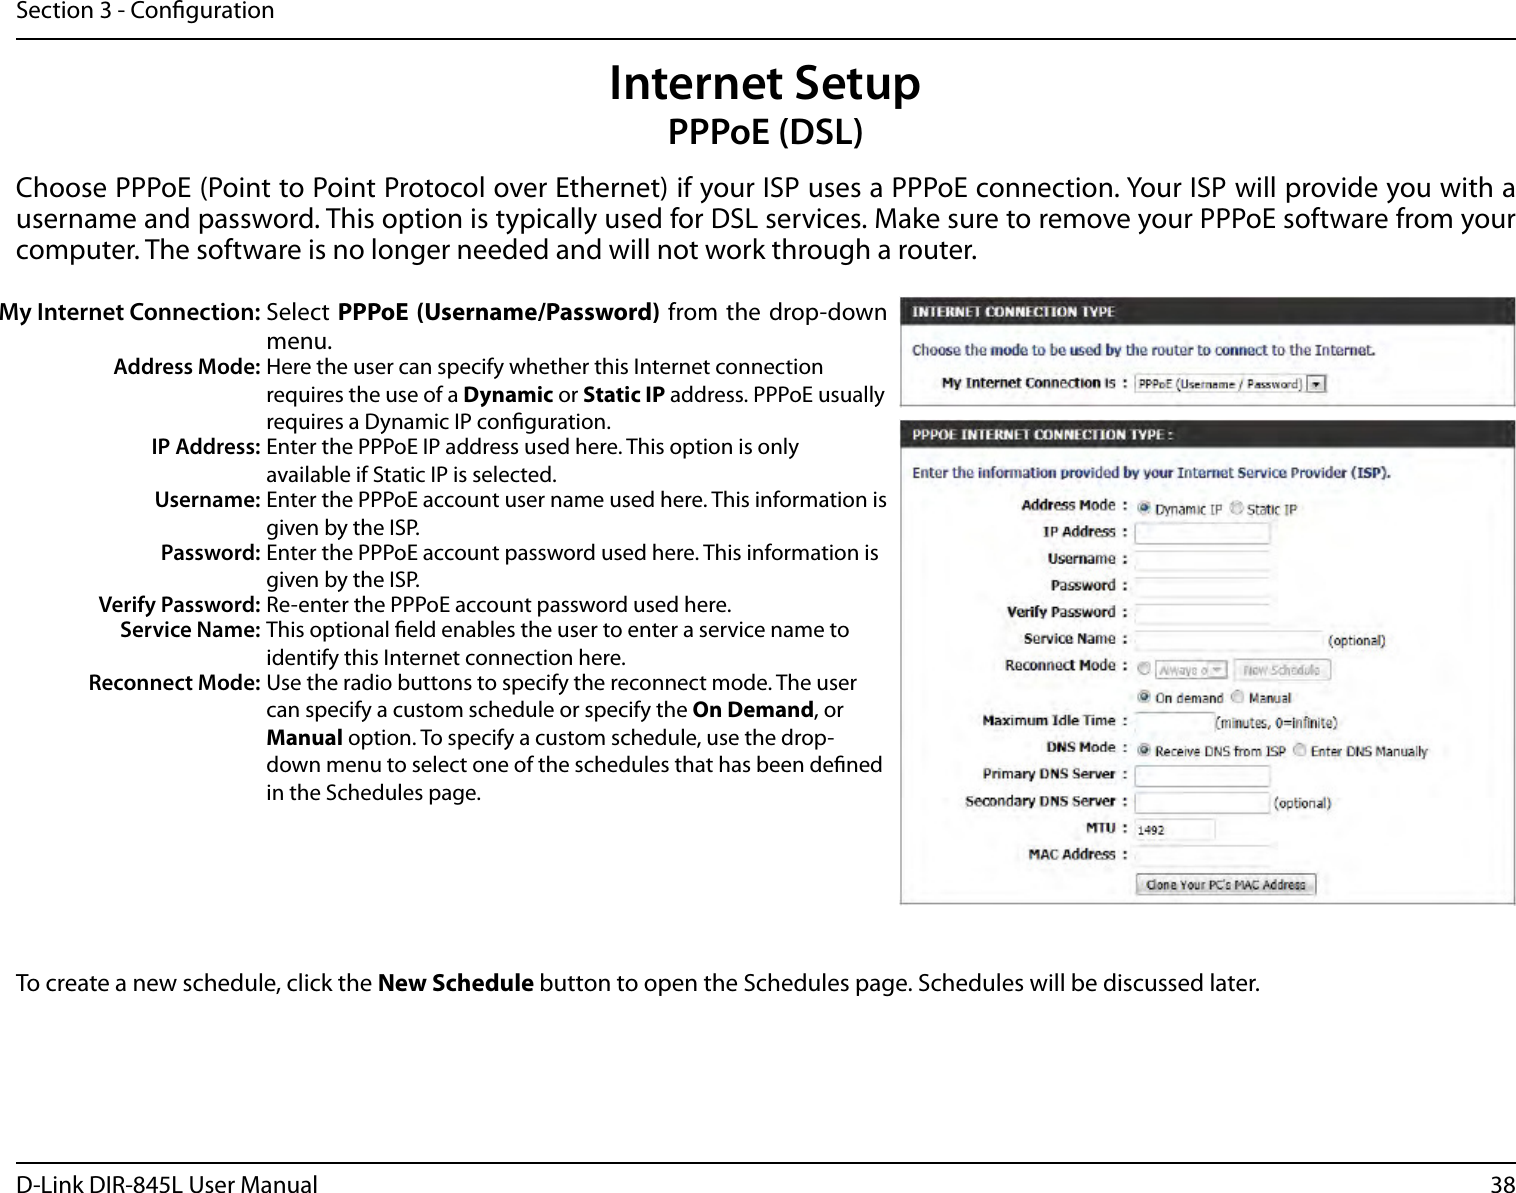 38D-Link DIR-845L User ManualSection 3 - CongurationInternet SetupPPPoE (DSL)Choose PPPoE (Point to Point Protocol over Ethernet) if your ISP uses a PPPoE connection. Your ISP will provide you with a username and password. This option is typically used for DSL services. Make sure to remove your PPPoE software from your computer. The software is no longer needed and will not work through a router.My Internet Connection: Select PPPoE (Username/Password) from the drop-down menu.Address Mode: Here the user can specify whether this Internet connection requires the use of a Dynamic or Static IP address. PPPoE usually requires a Dynamic IP conguration.IP Address: Enter the PPPoE IP address used here. This option is only available if Static IP is selected.Username: Enter the PPPoE account user name used here. This information is given by the ISP.Password: Enter the PPPoE account password used here. This information is given by the ISP.Verify Password: Re-enter the PPPoE account password used here.Service Name: This optional eld enables the user to enter a service name to identify this Internet connection here.Reconnect Mode: Use the radio buttons to specify the reconnect mode. The user can specify a custom schedule or specify the On Demand, or Manual option. To specify a custom schedule, use the drop-down menu to select one of the schedules that has been dened in the Schedules page.To create a new schedule, click the New Schedule button to open the Schedules page. Schedules will be discussed later.